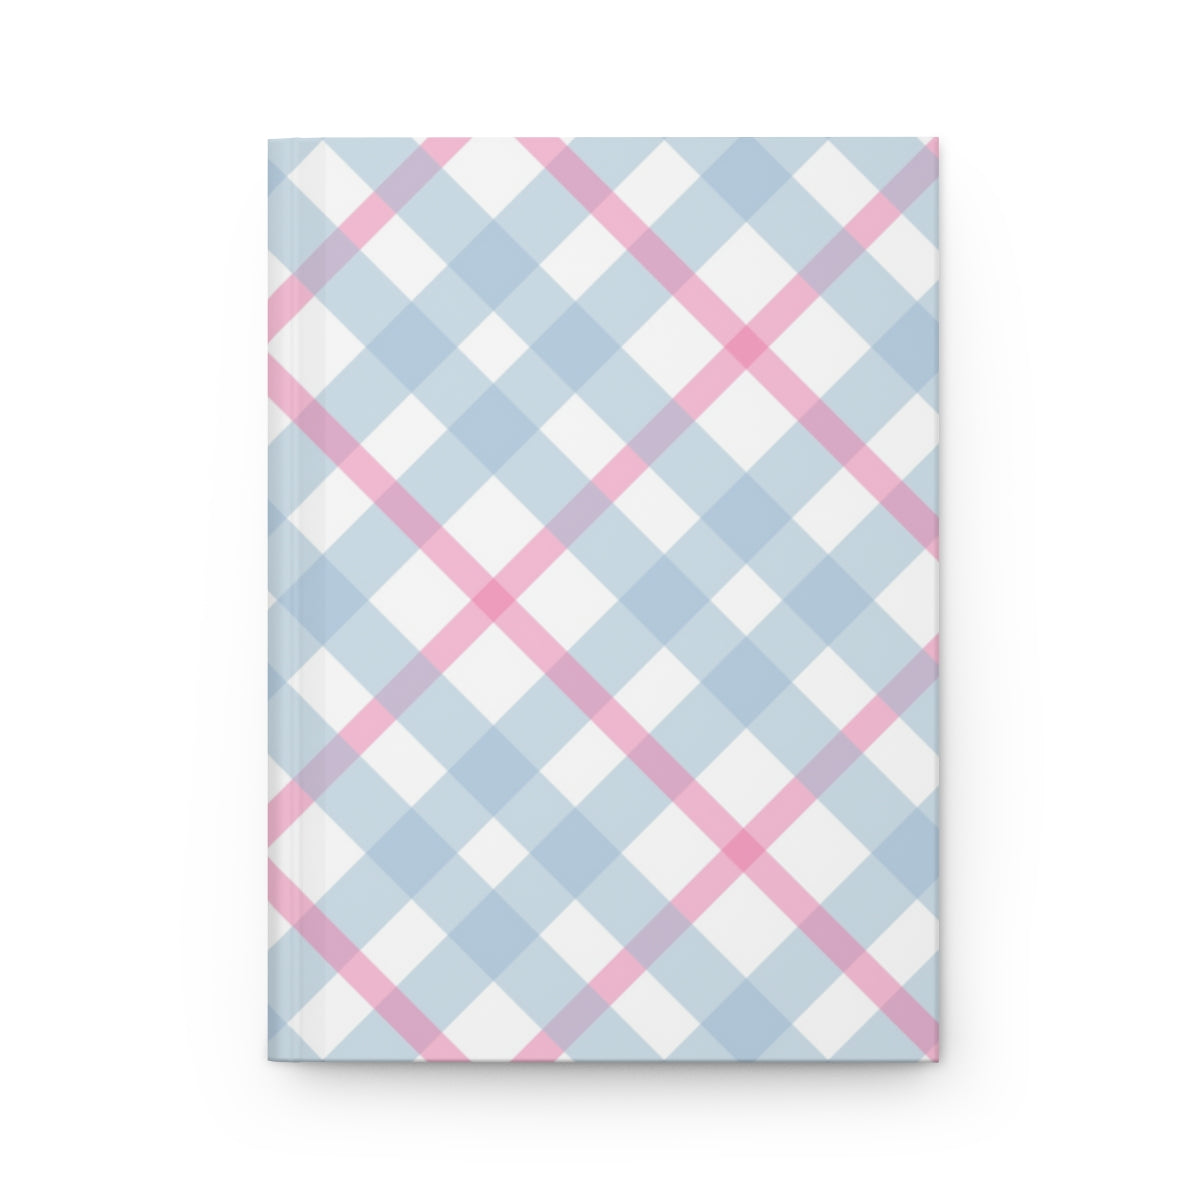 Plaid Gingham Hardcover Matte Journal Paper products Pink Sweetheart